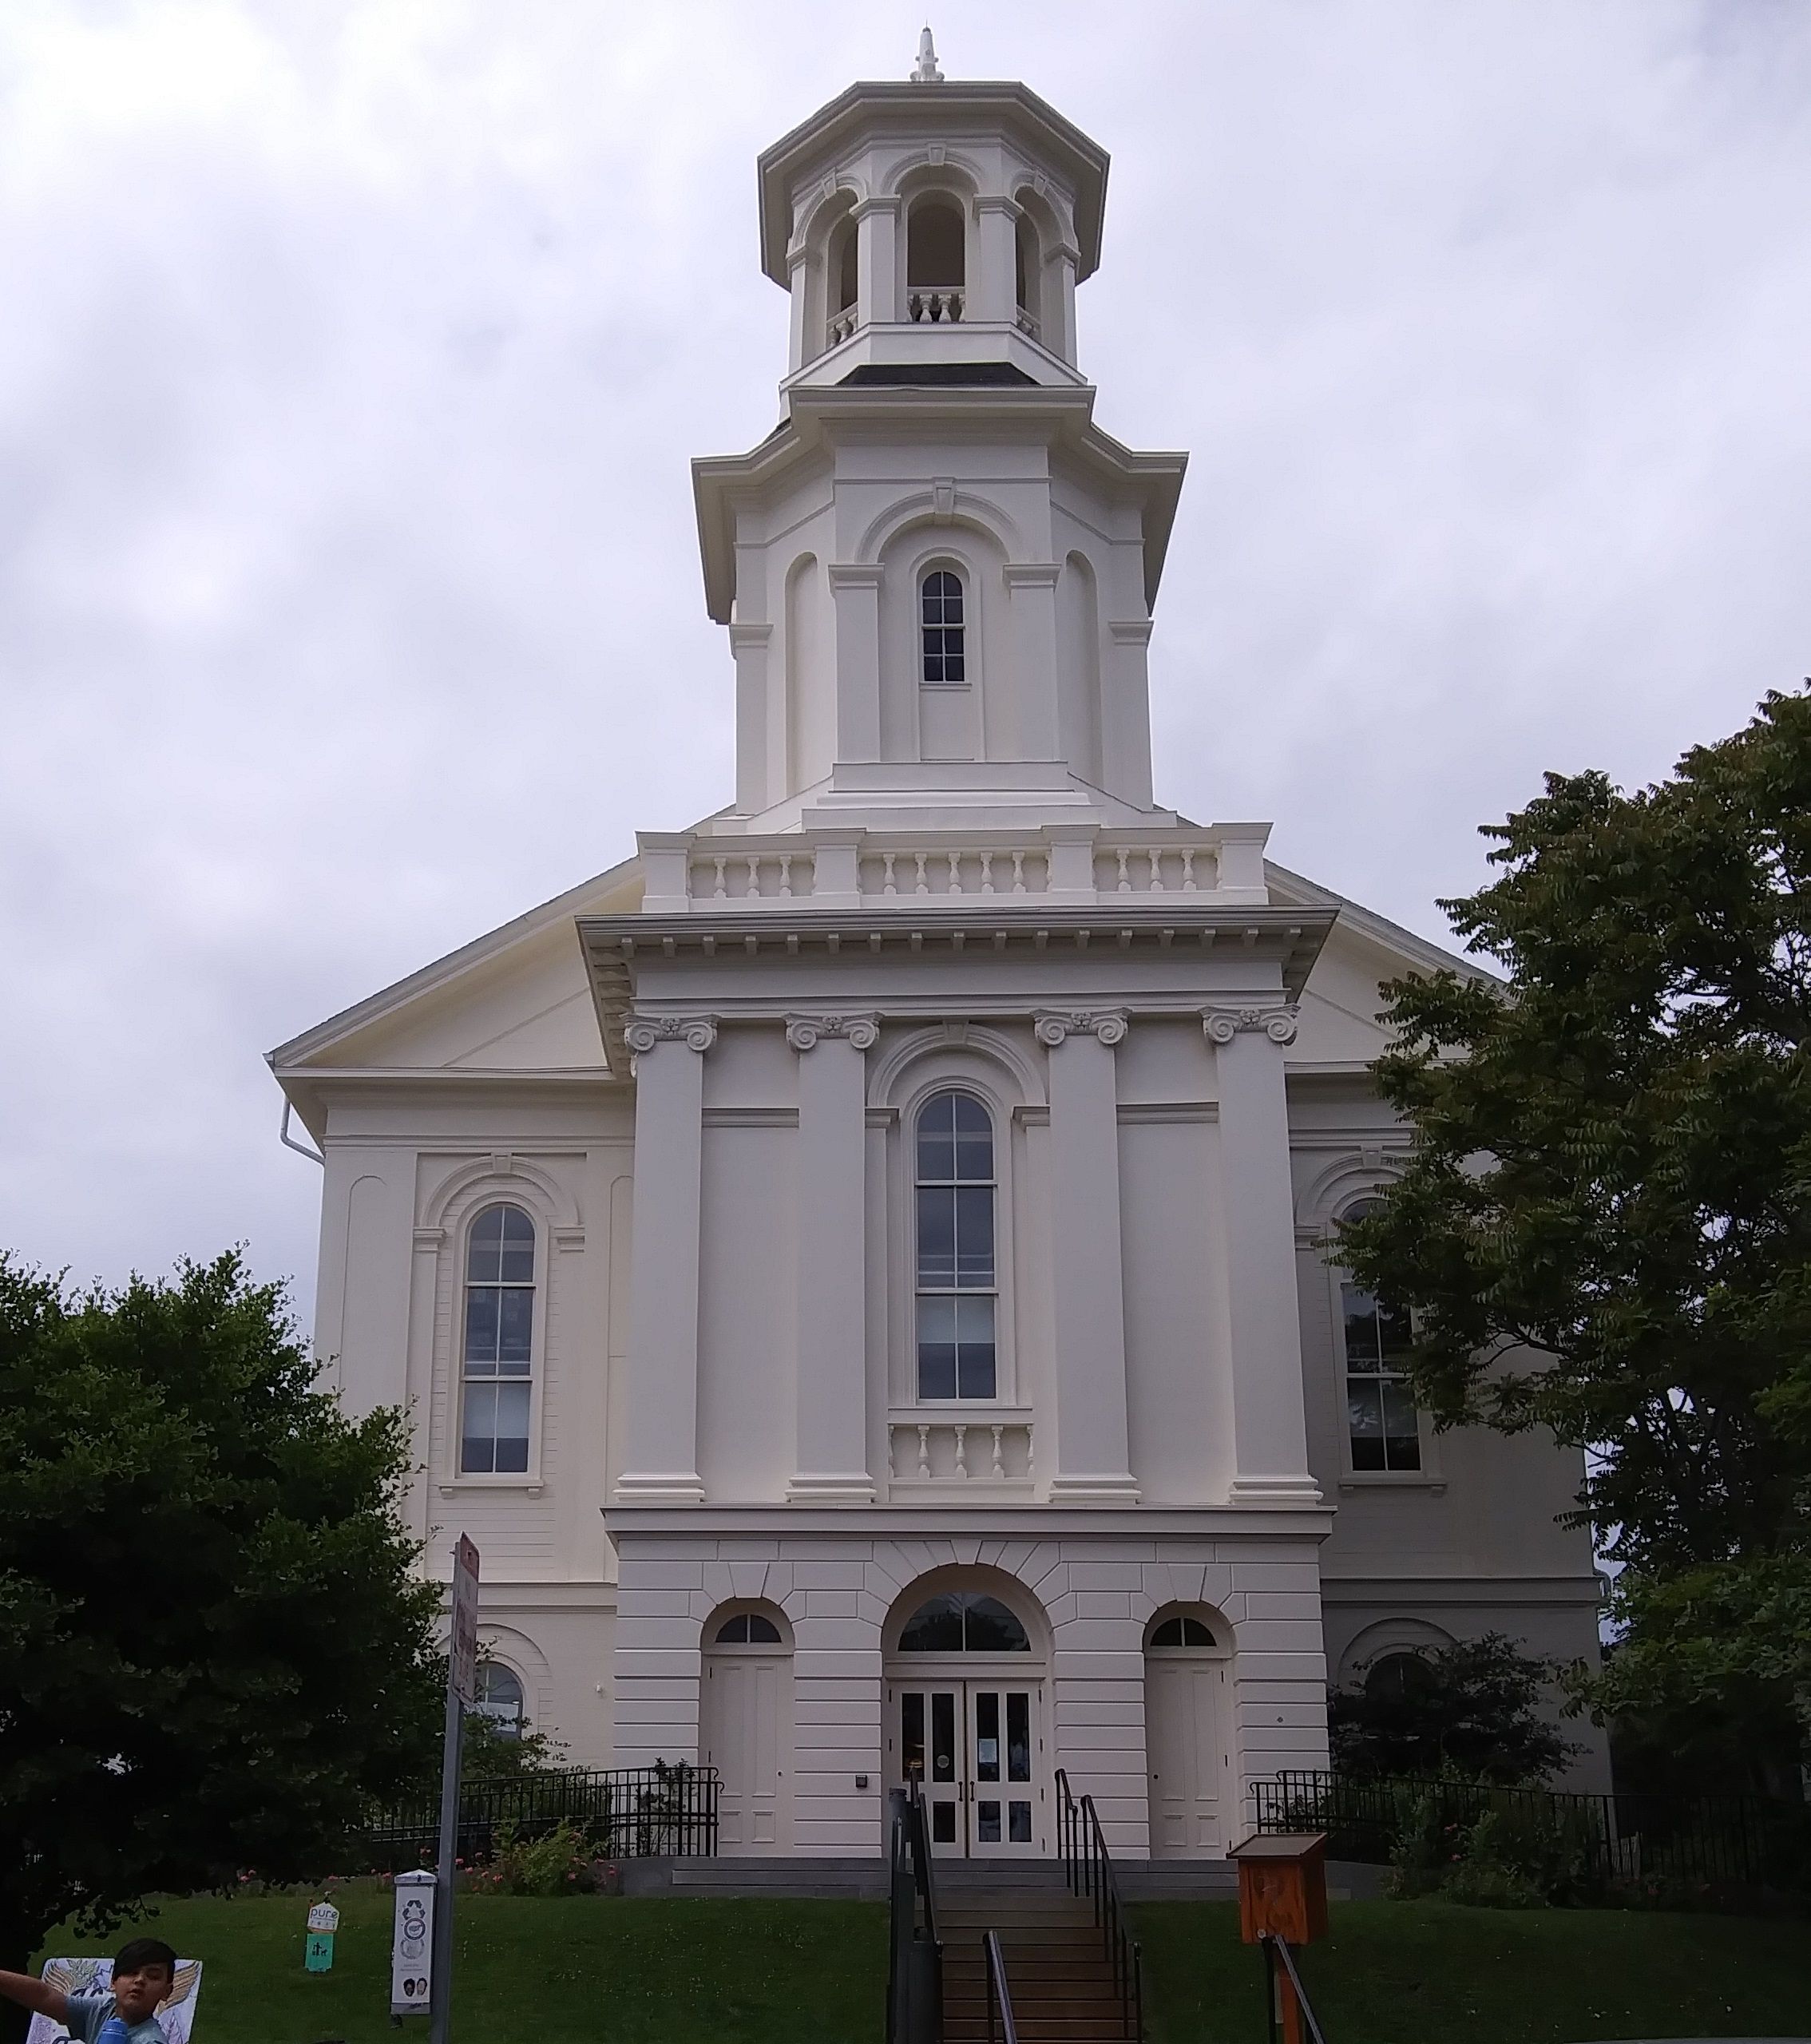 A front view of the Provincetown Library, a white former Church complete with a steeple on top